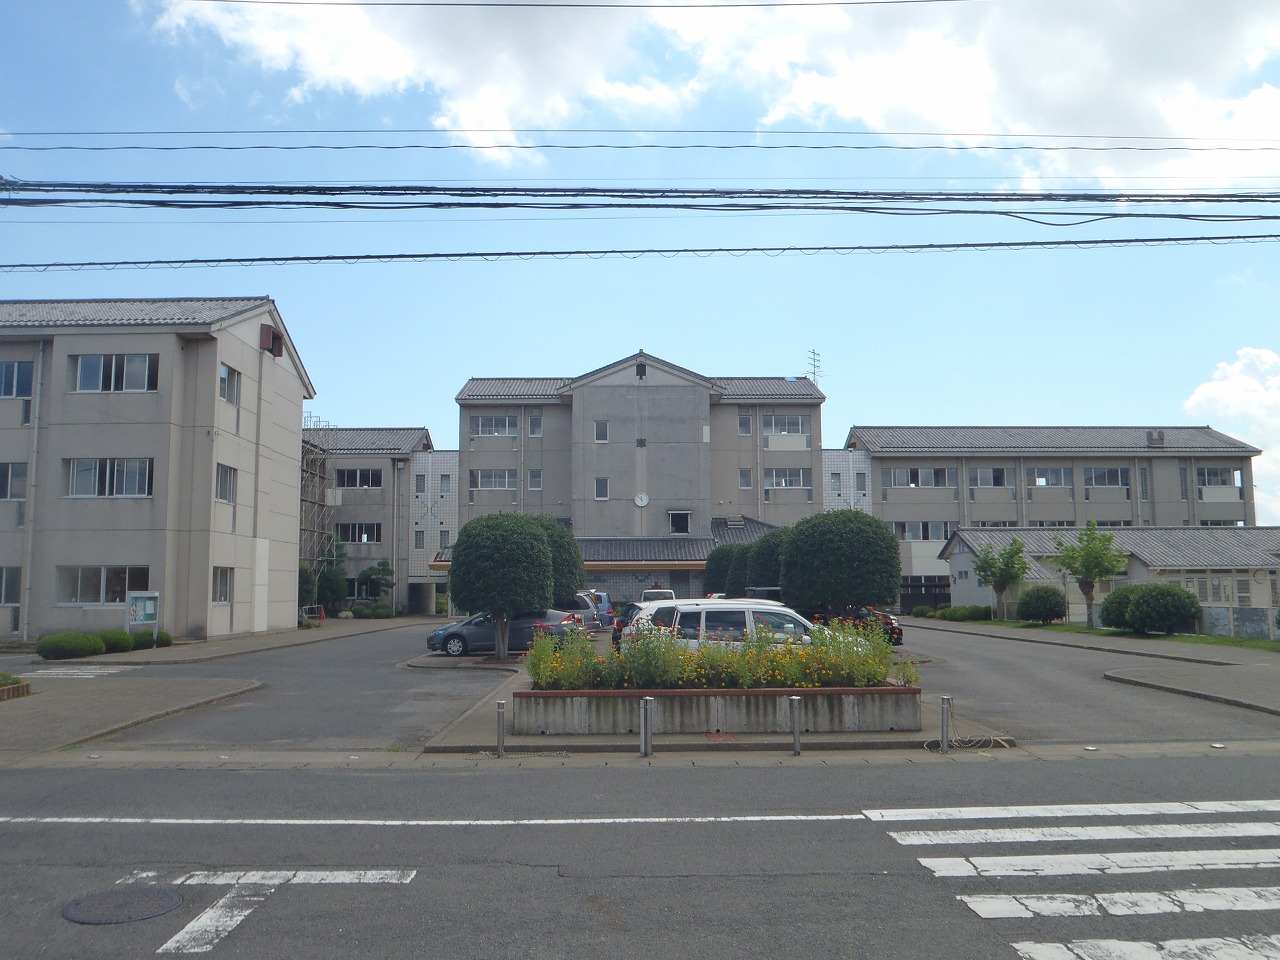 Primary school. Hitachinaka 1150m to stand outfield elementary school (elementary school)